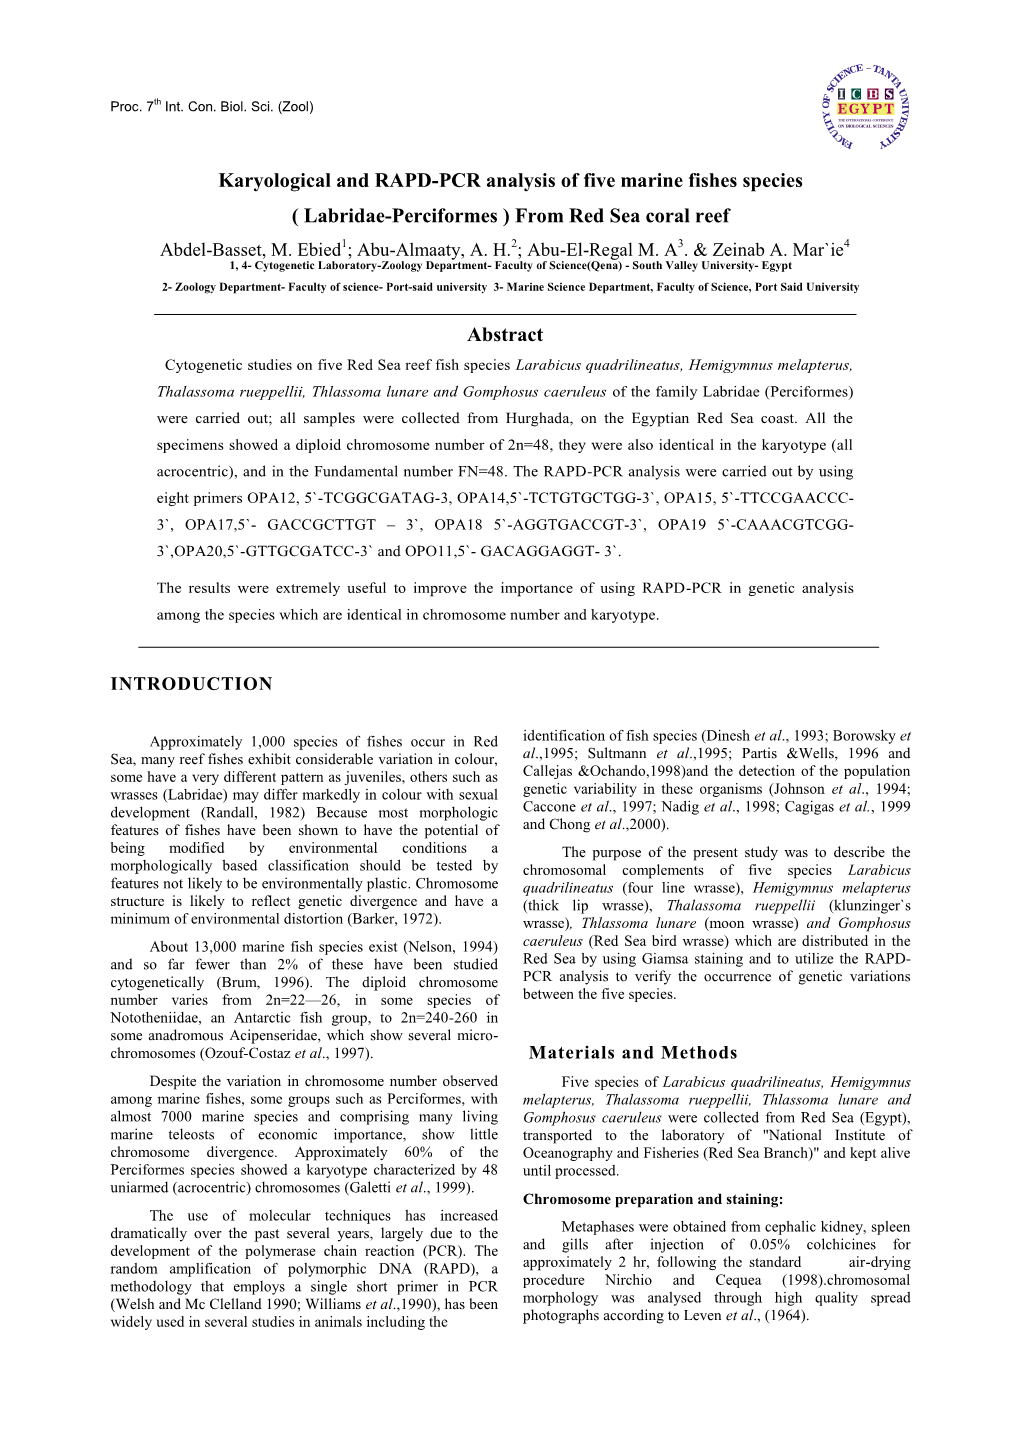 The Format of the Journal of the International